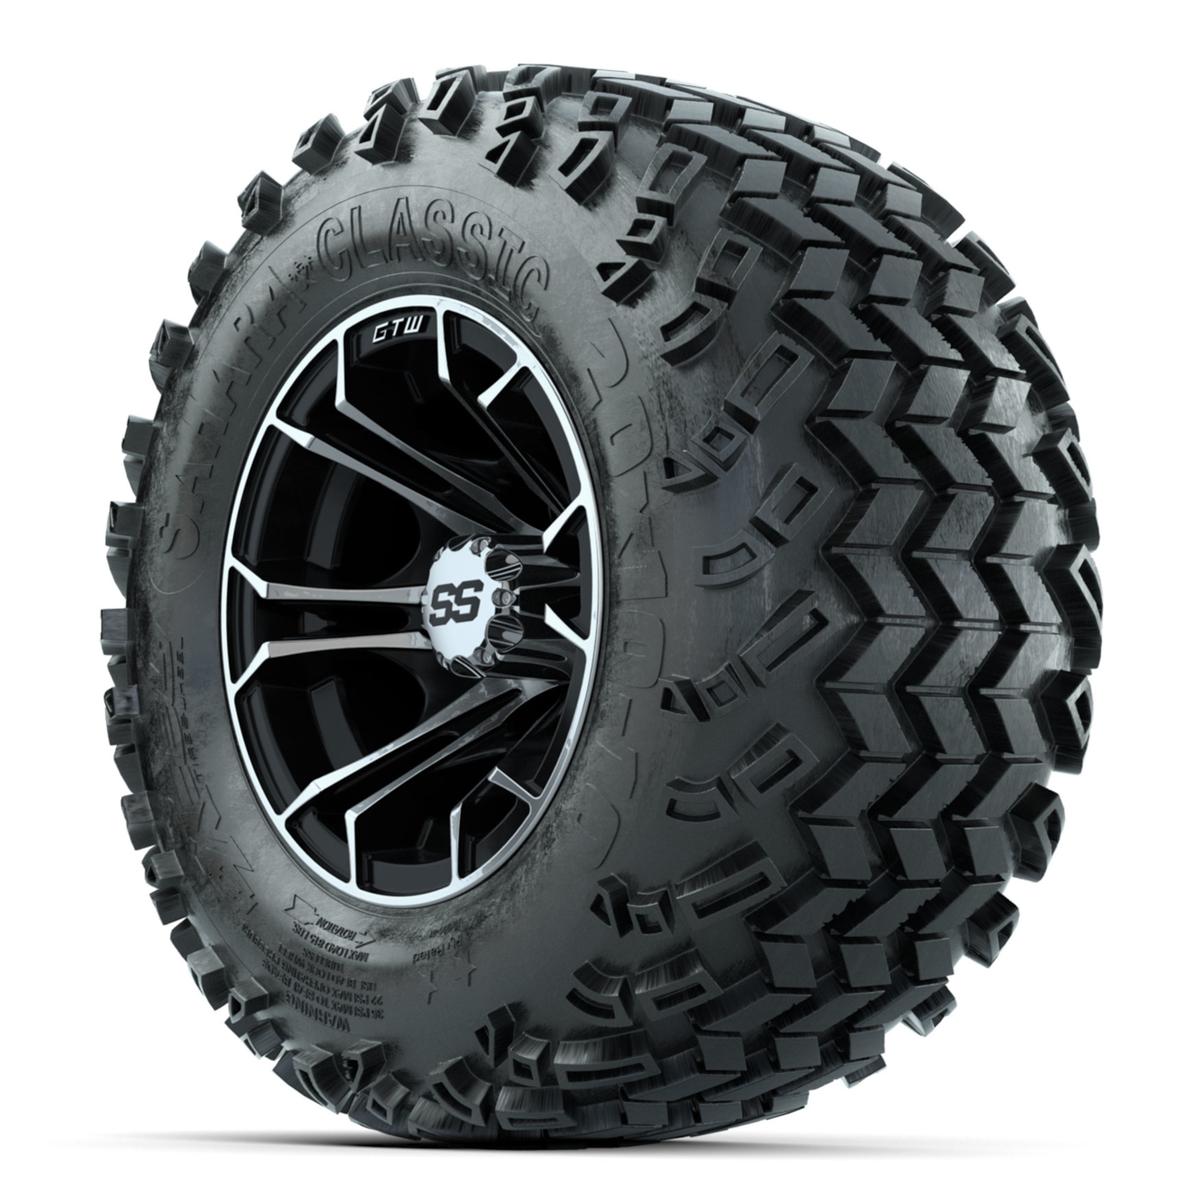 GTW Spyder Machined/Black 10 in Wheels with 20x10-10 Sahara Classic All Terrain Tires – Full Set